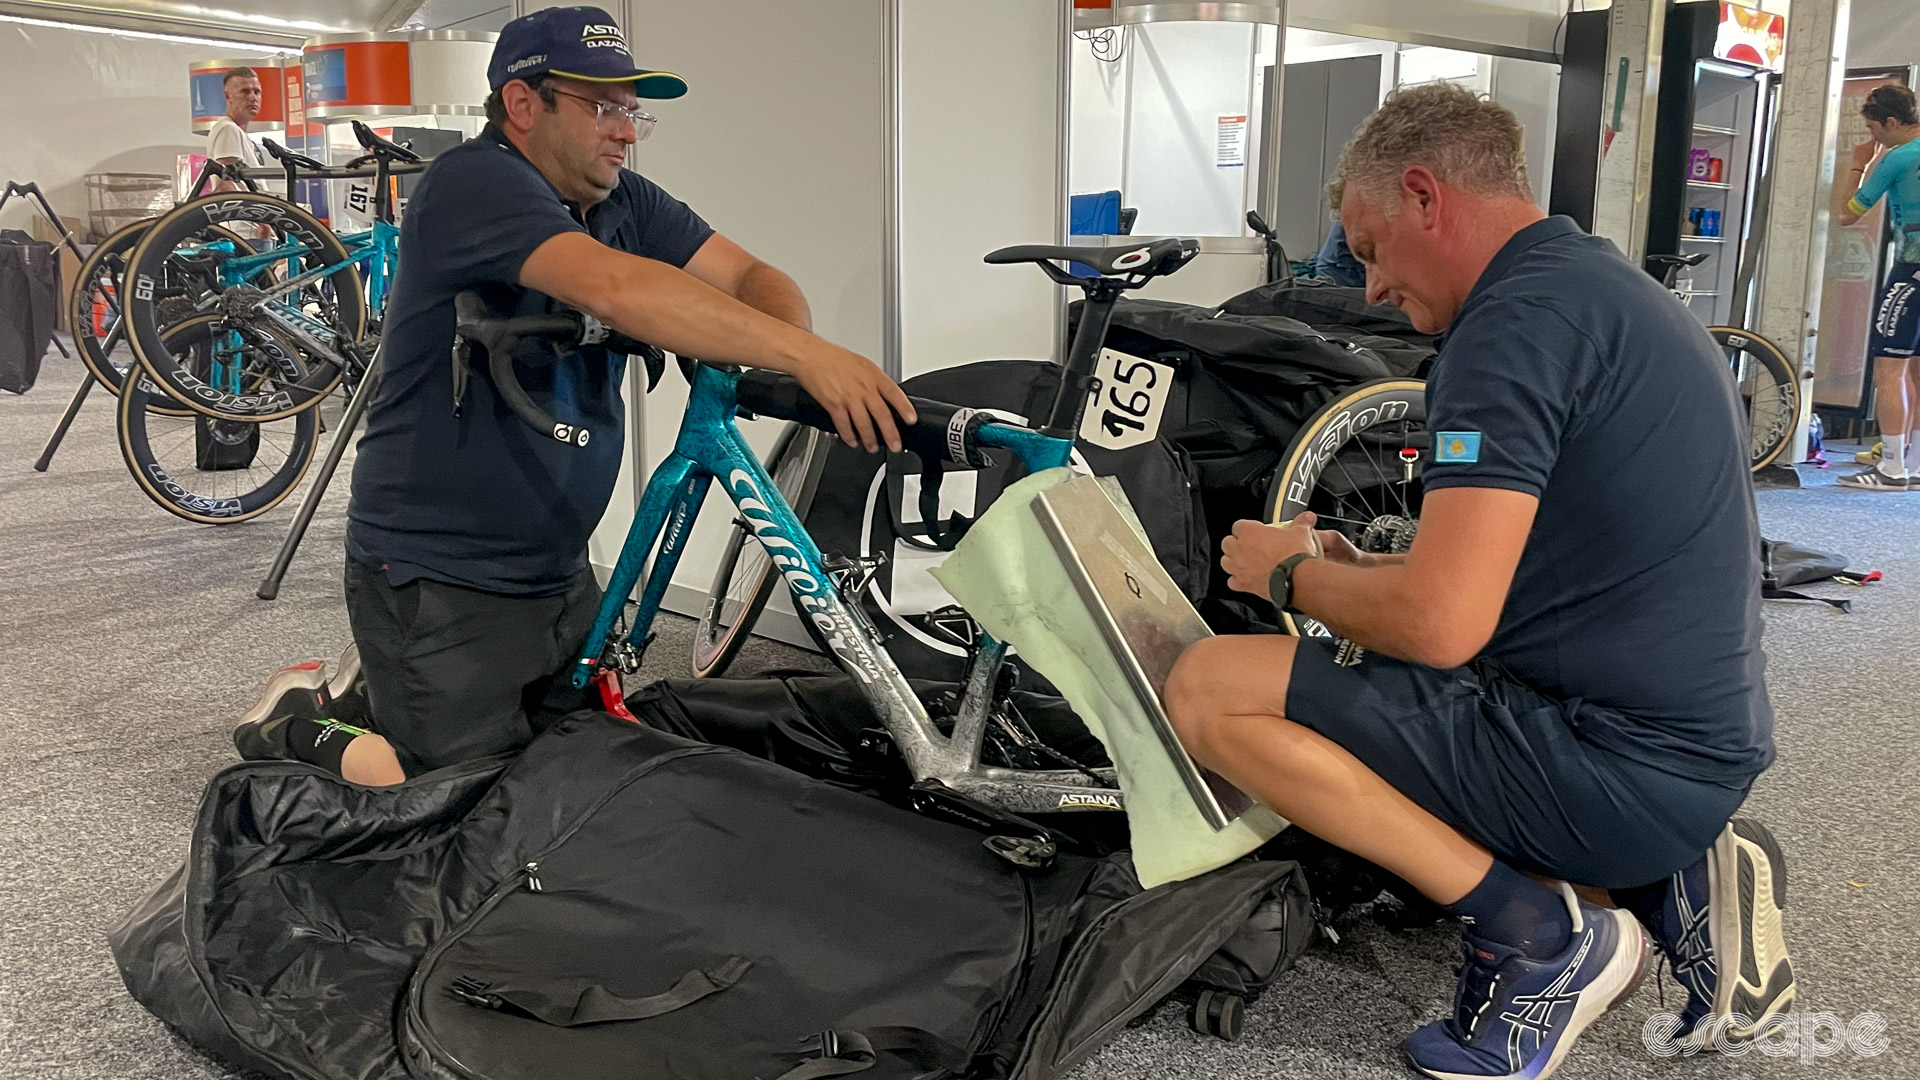 The photo shows two Astana mechanics wrapping a Wilier bike for packing into a bike bag. 